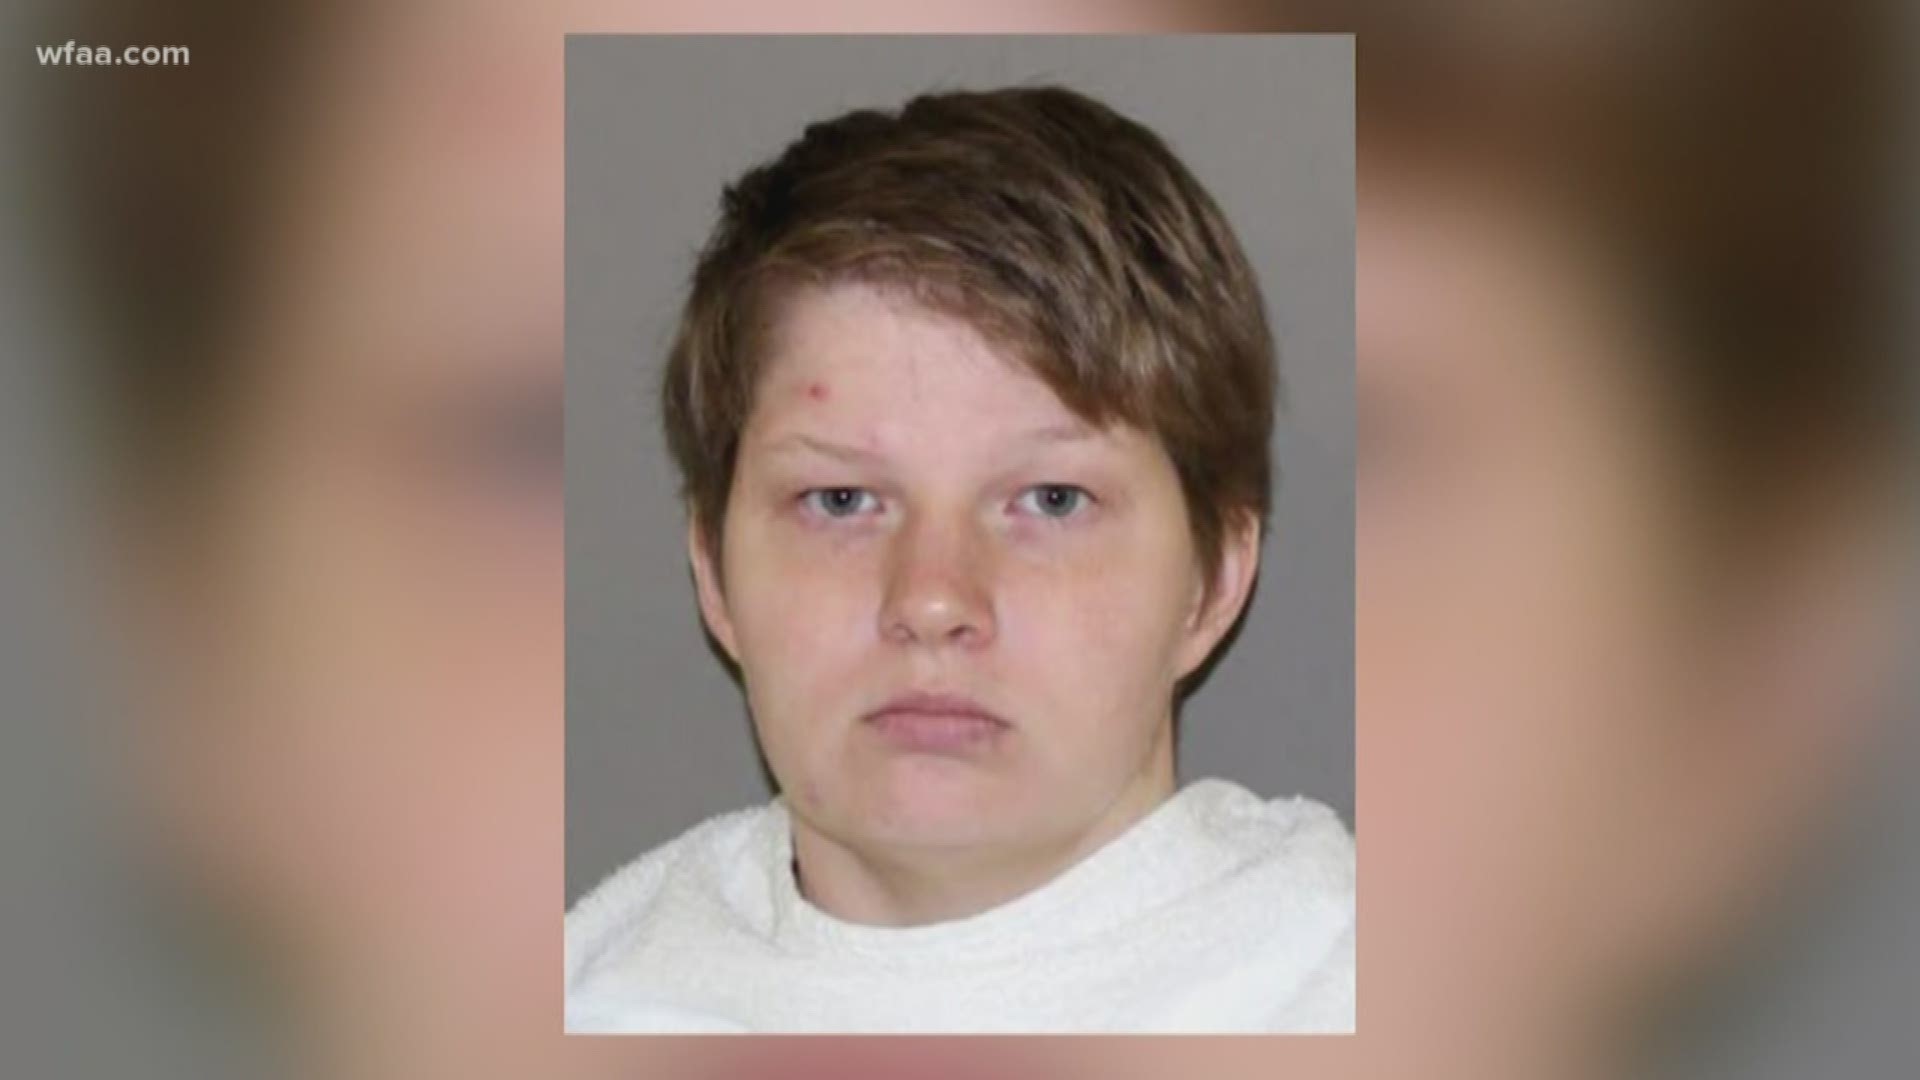 She is accused of having a sexual relationship with a minor, police say.